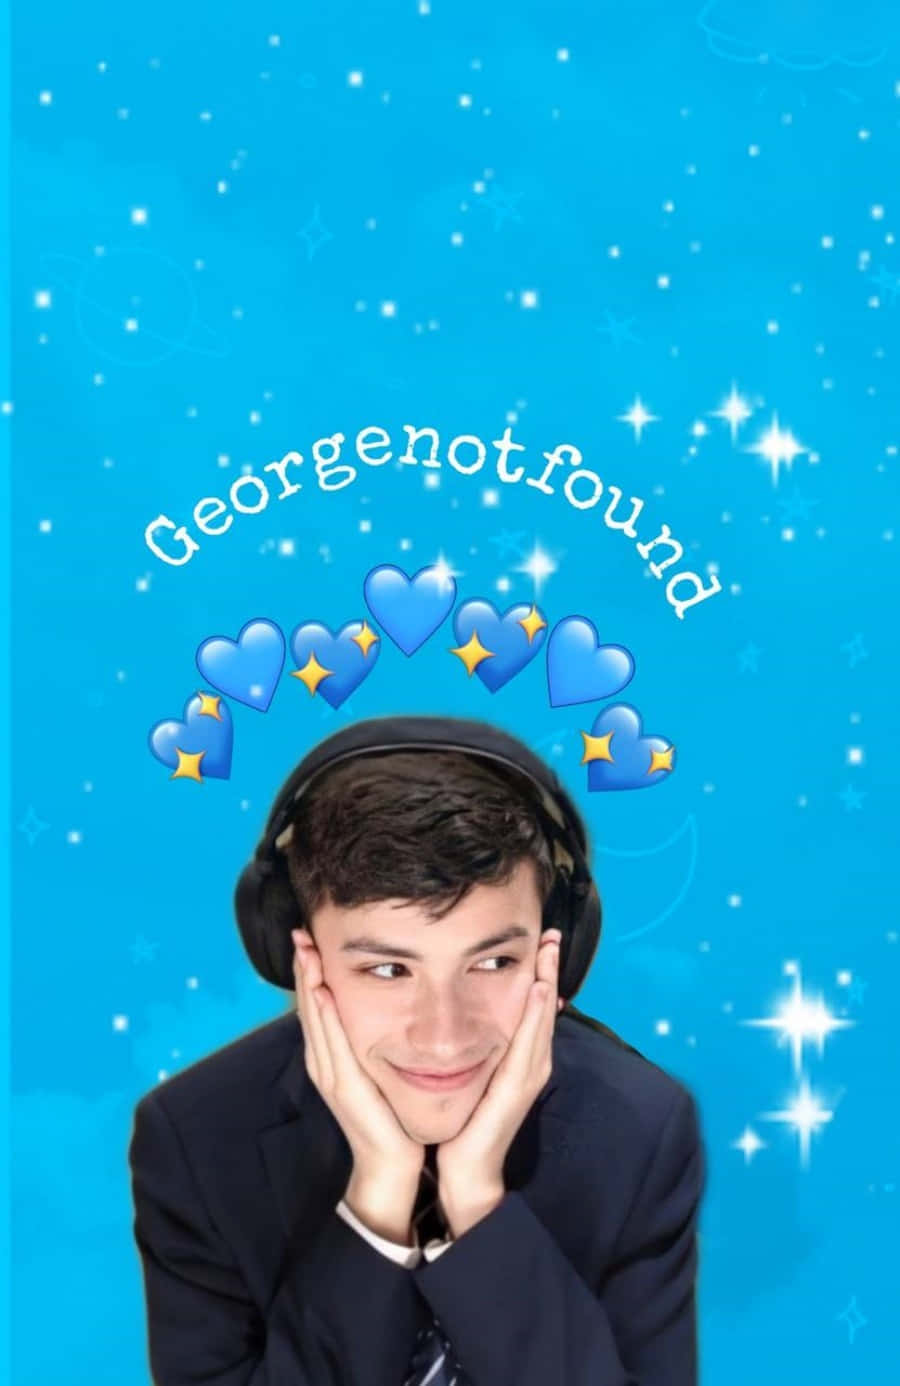 GeorgeNotFound With Blue Hearts Wallpaper